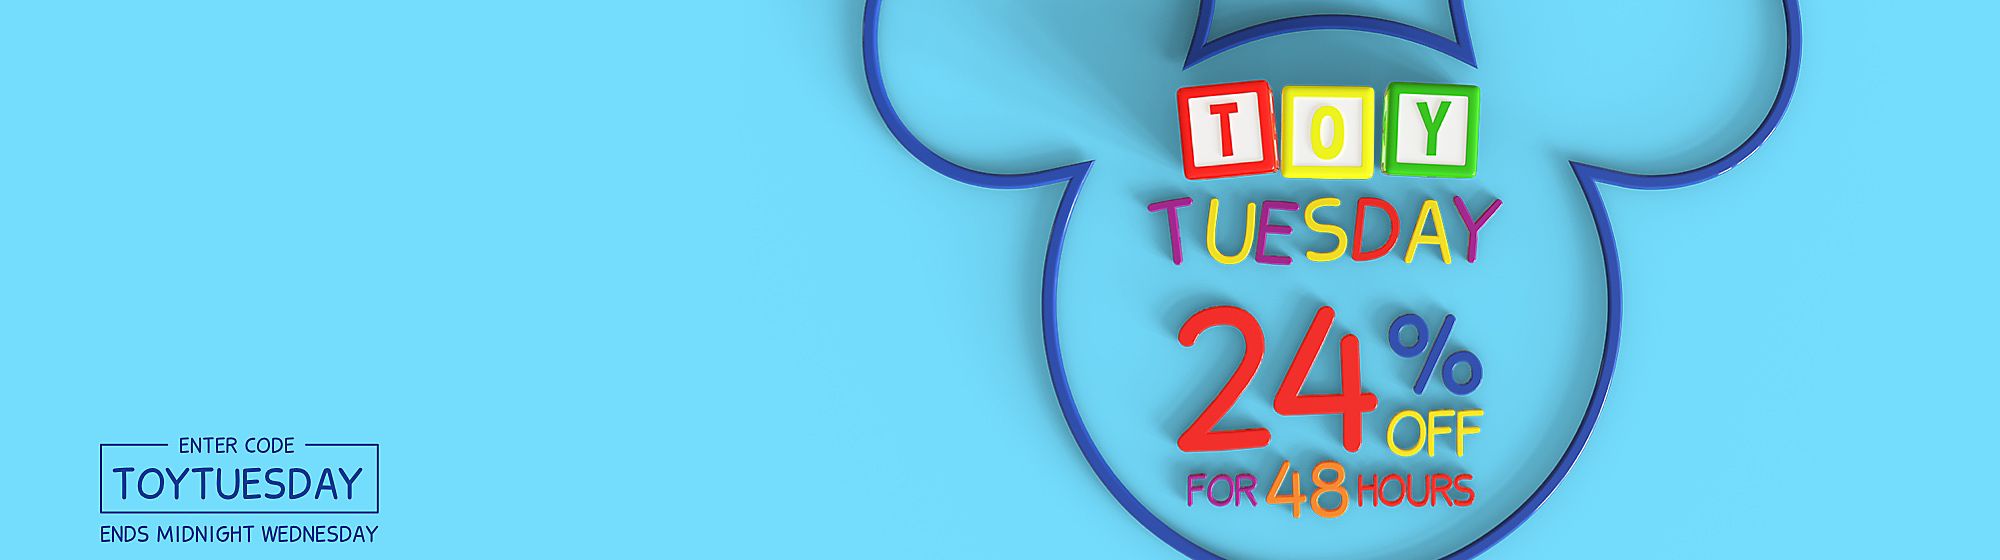 24% Off Selected Toys, Costumes & Stationery CODE: TOYTUESDAY
Mickey icon indicates items on offer
Ends 04/11/2020 at 11:59pm | Online Only | T&Cs apply 